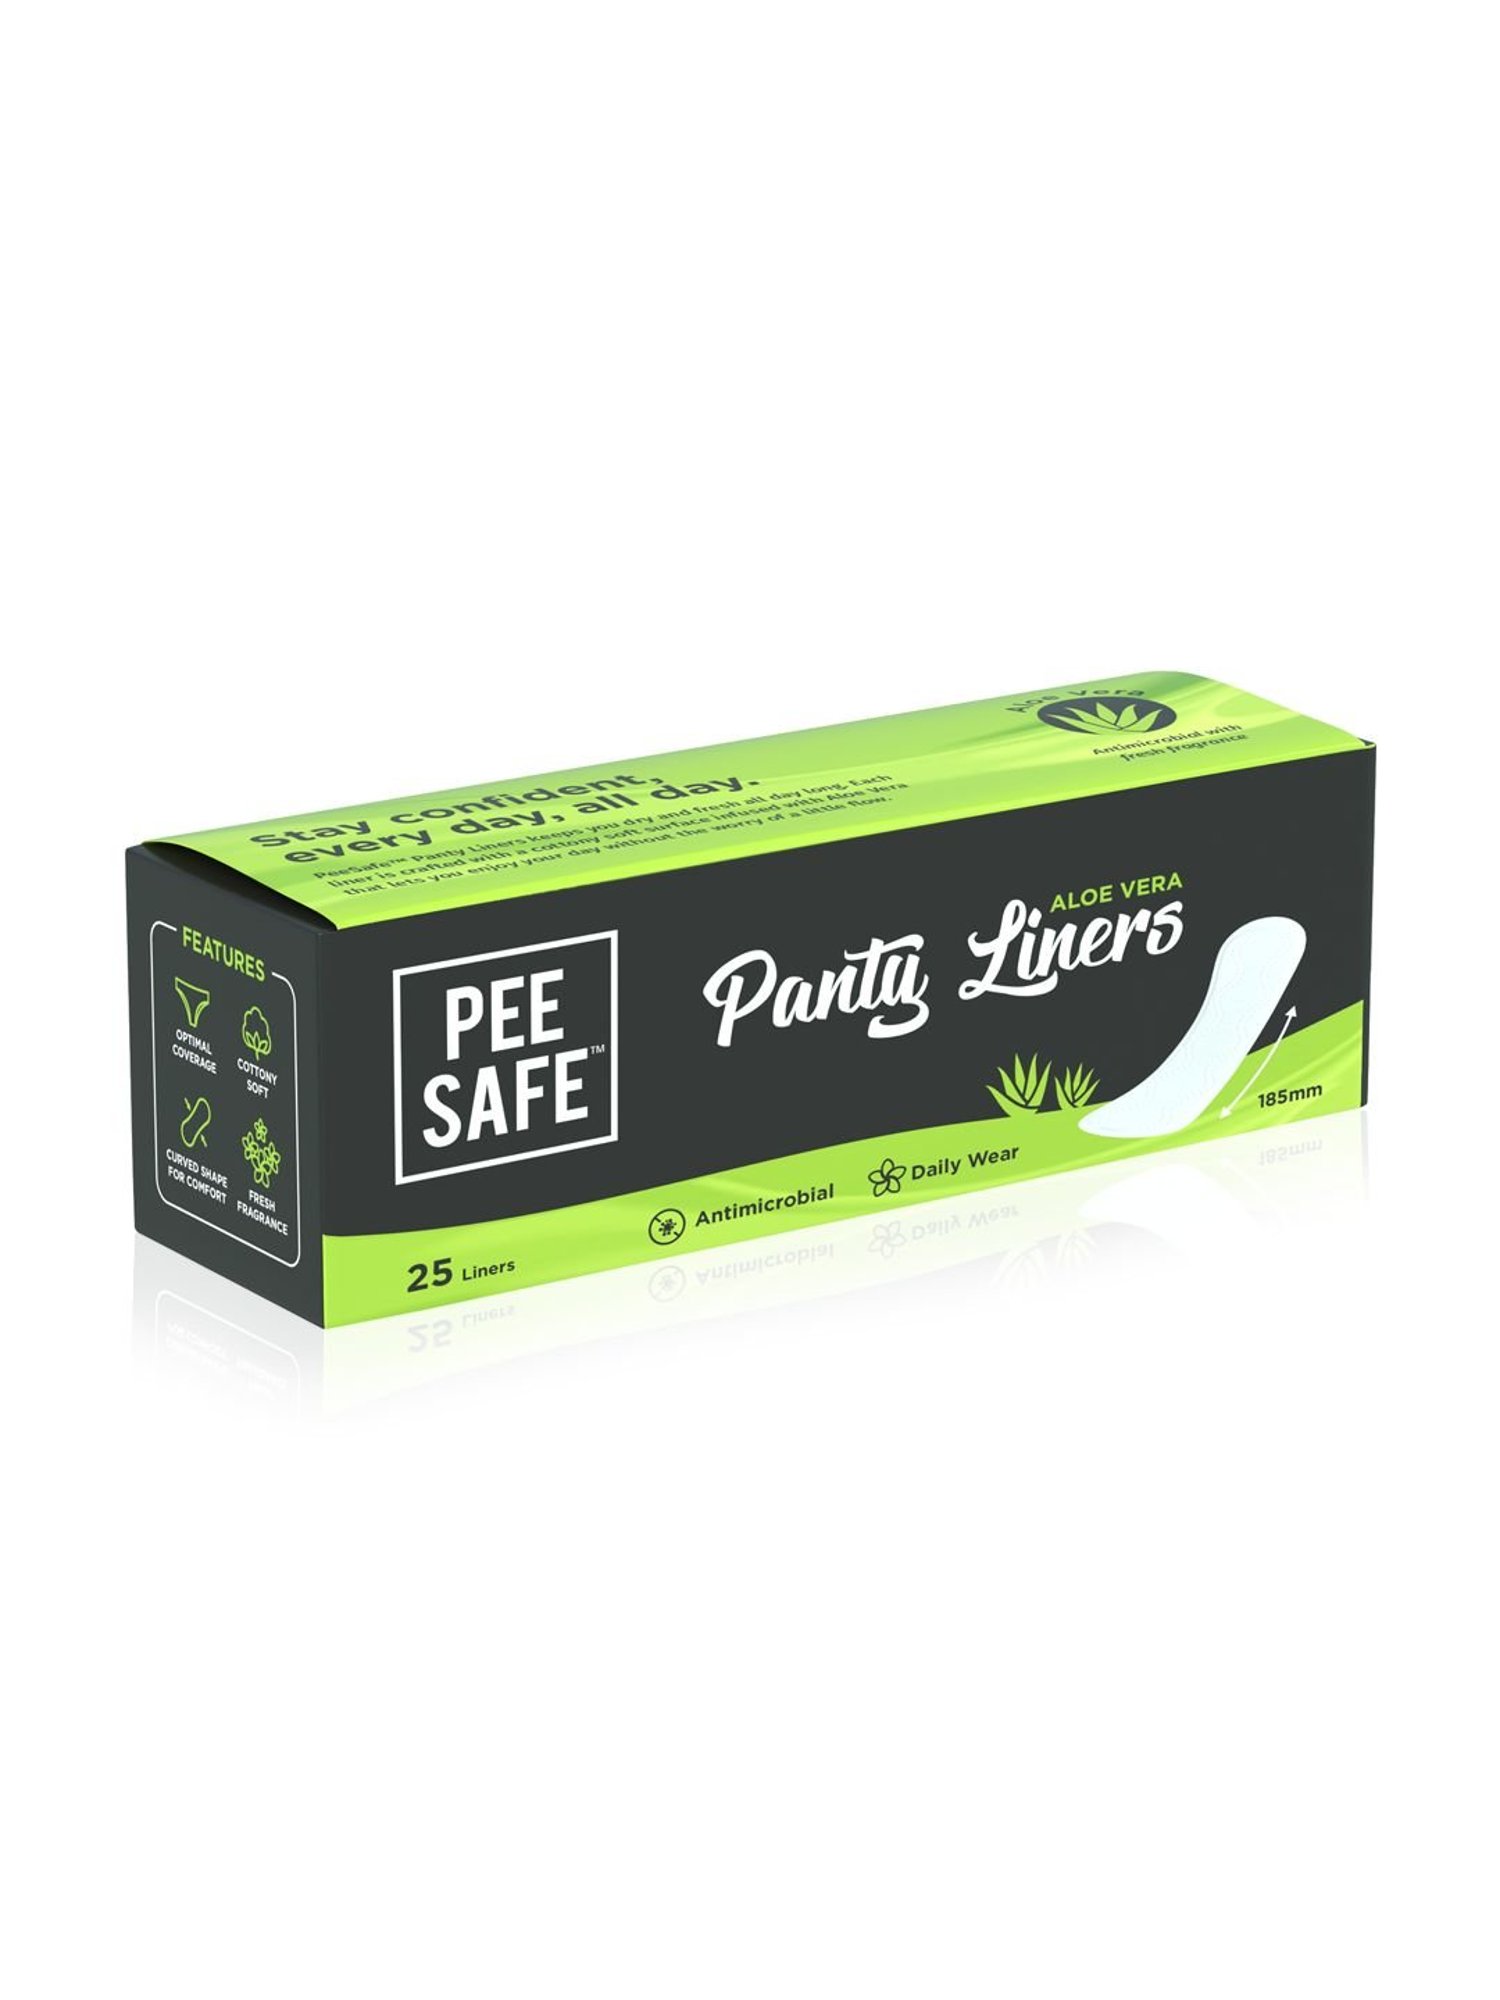 Pee Safe Aloe Vera Panty Liners, Cottony Soft for Extra Comfort Pantyliner, Buy Women Hygiene products online in India